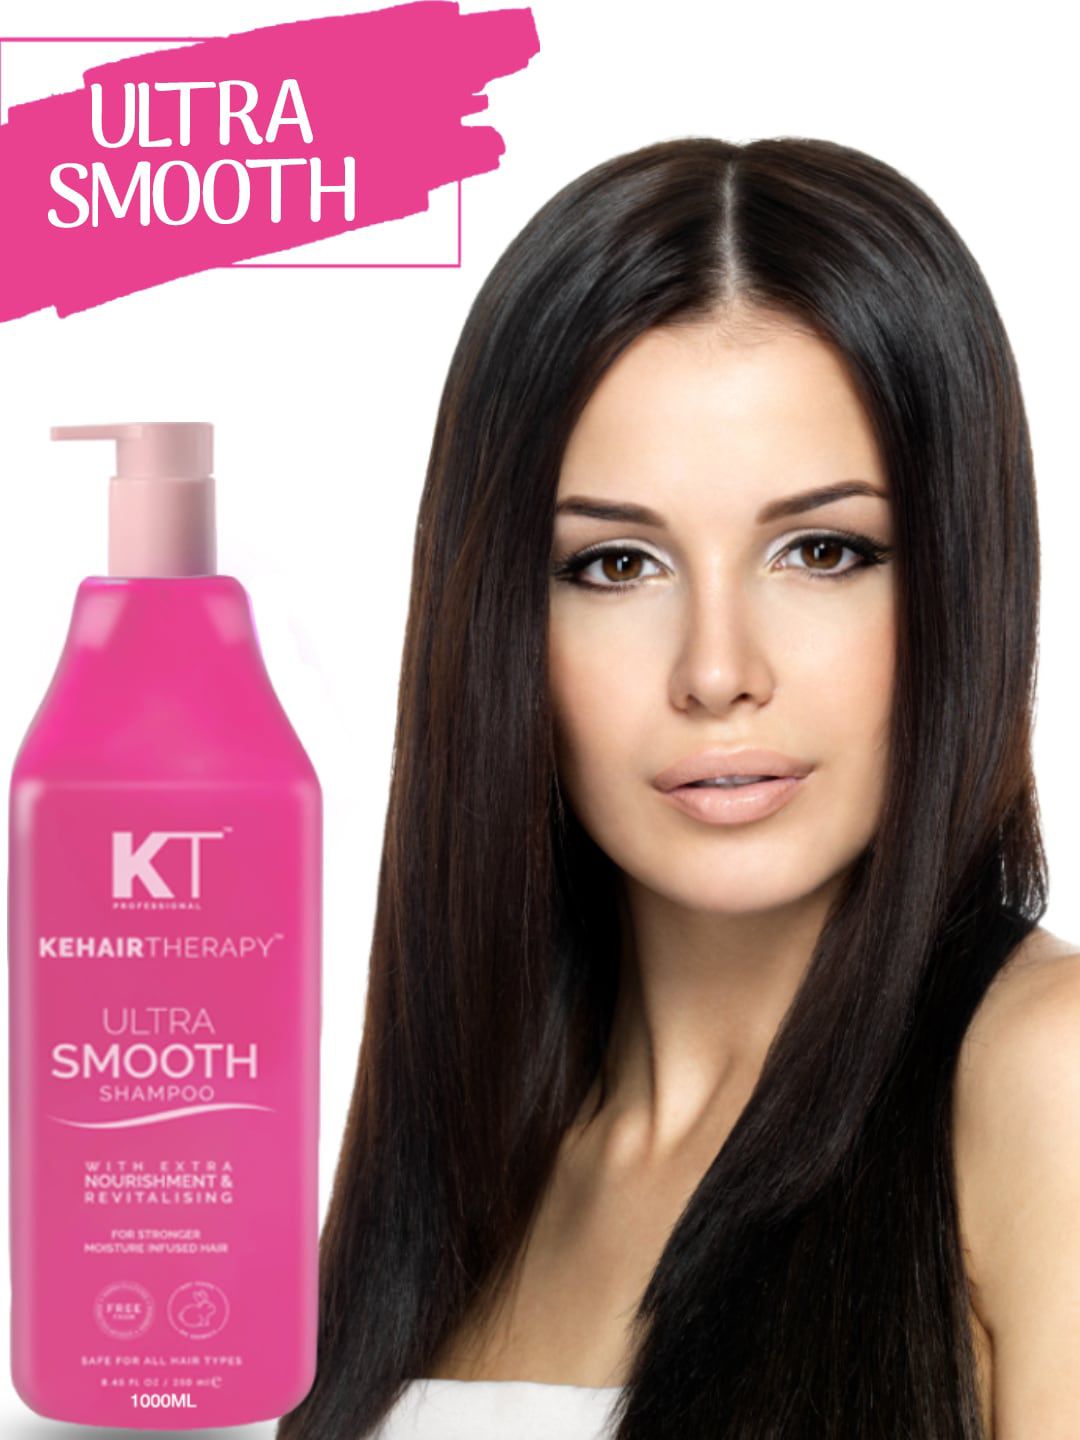 KEHAIRTHERAPY Ultra Smooth Keratin Shampoo with Extra Nourishment & Revitalizing - 1000 ml Price in India